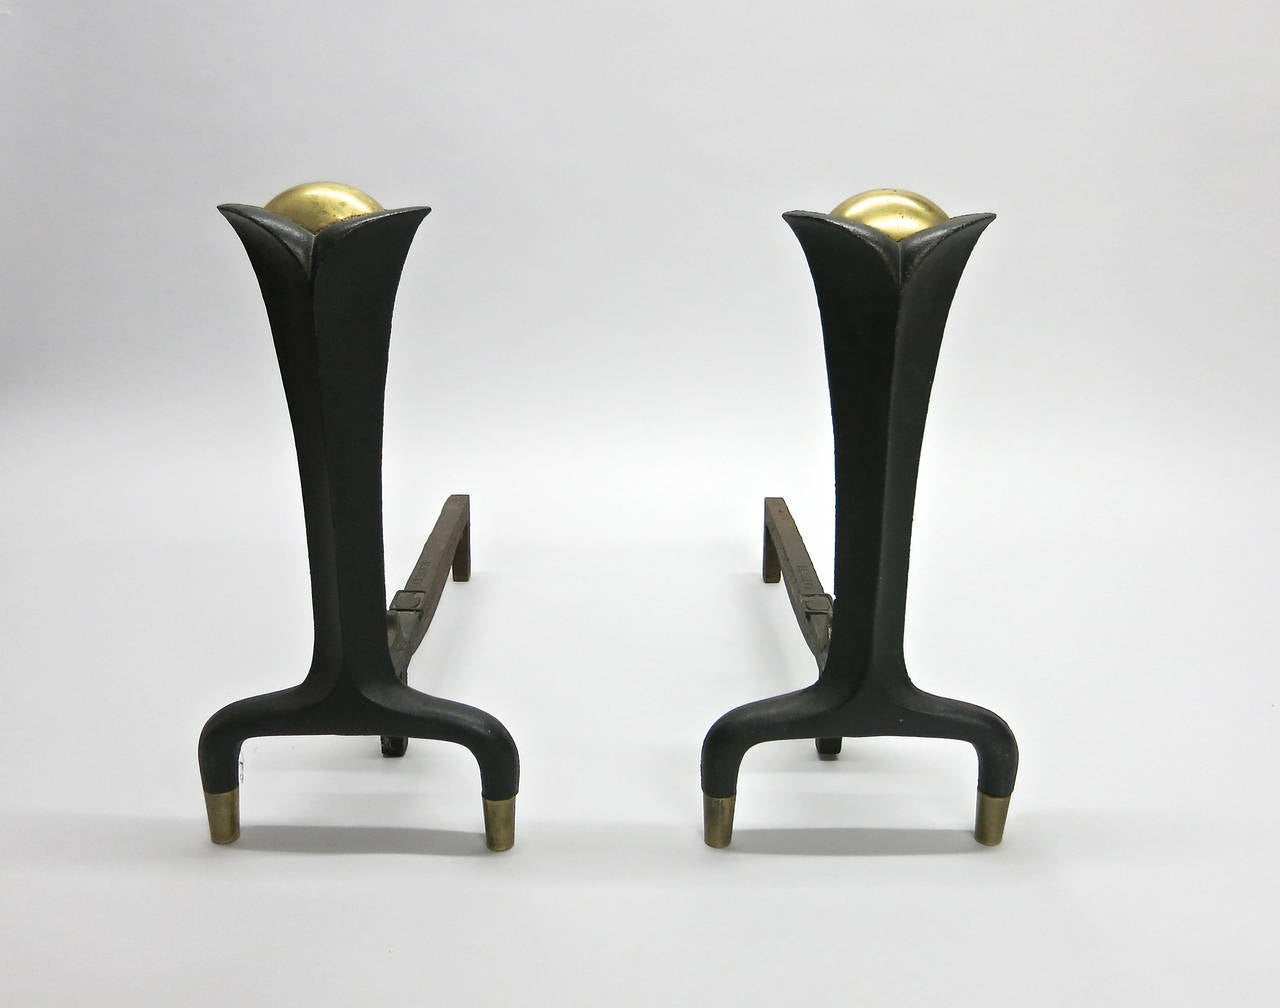 Pair of andirons in cast wrought iron with brass detail designed by Donald Deskey stamped and manufactured by Bennett Co.